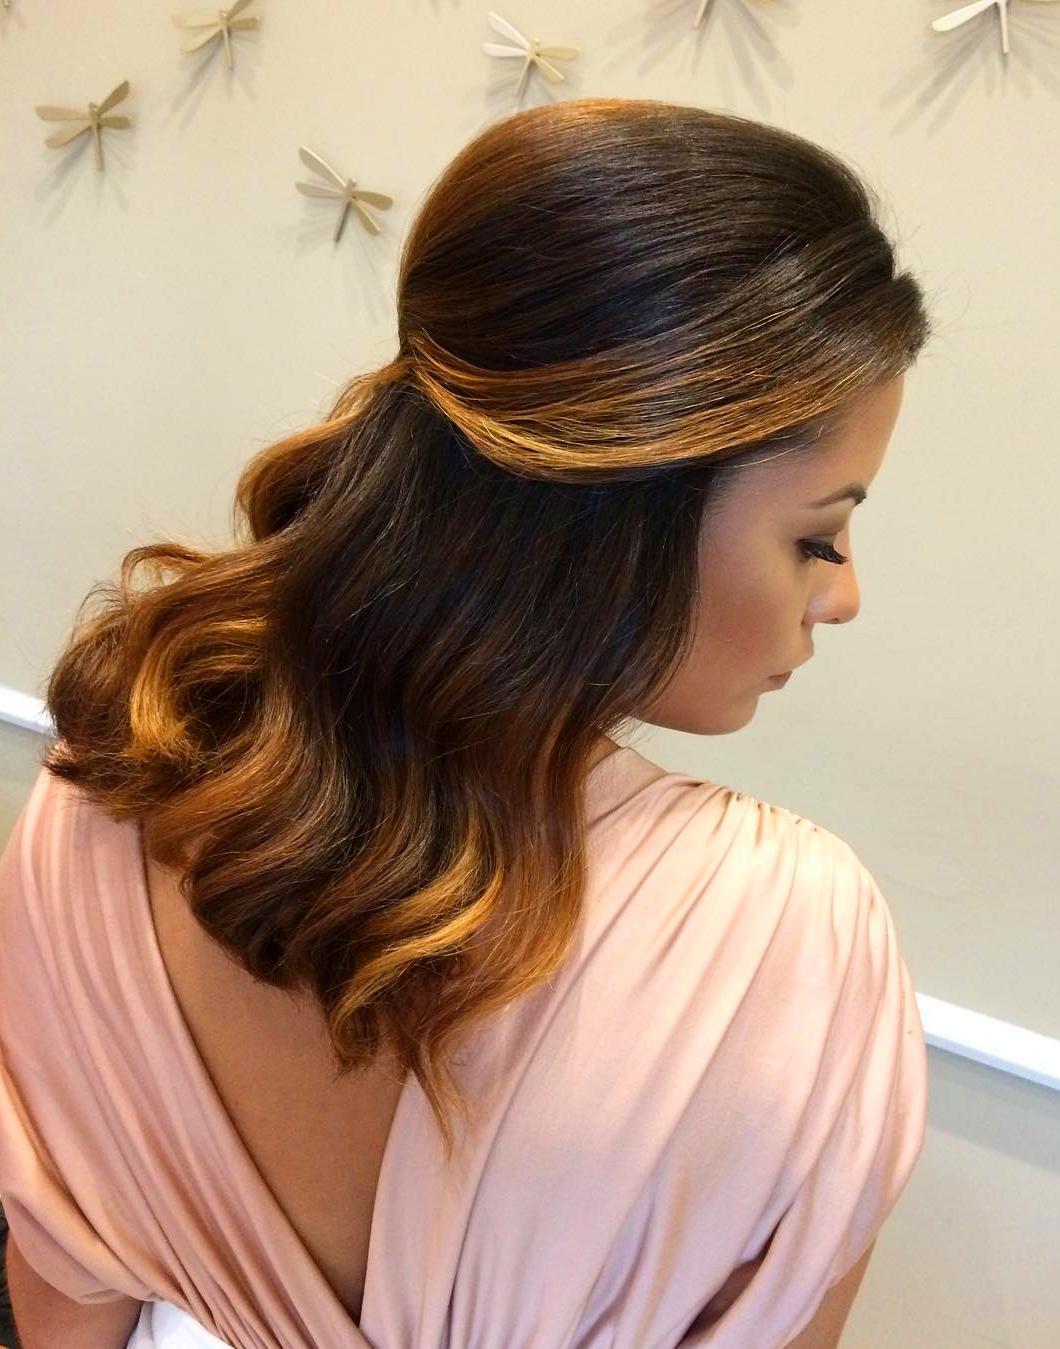 30+ Beautiful Hairstyles For Women: Casual And Prom Looks